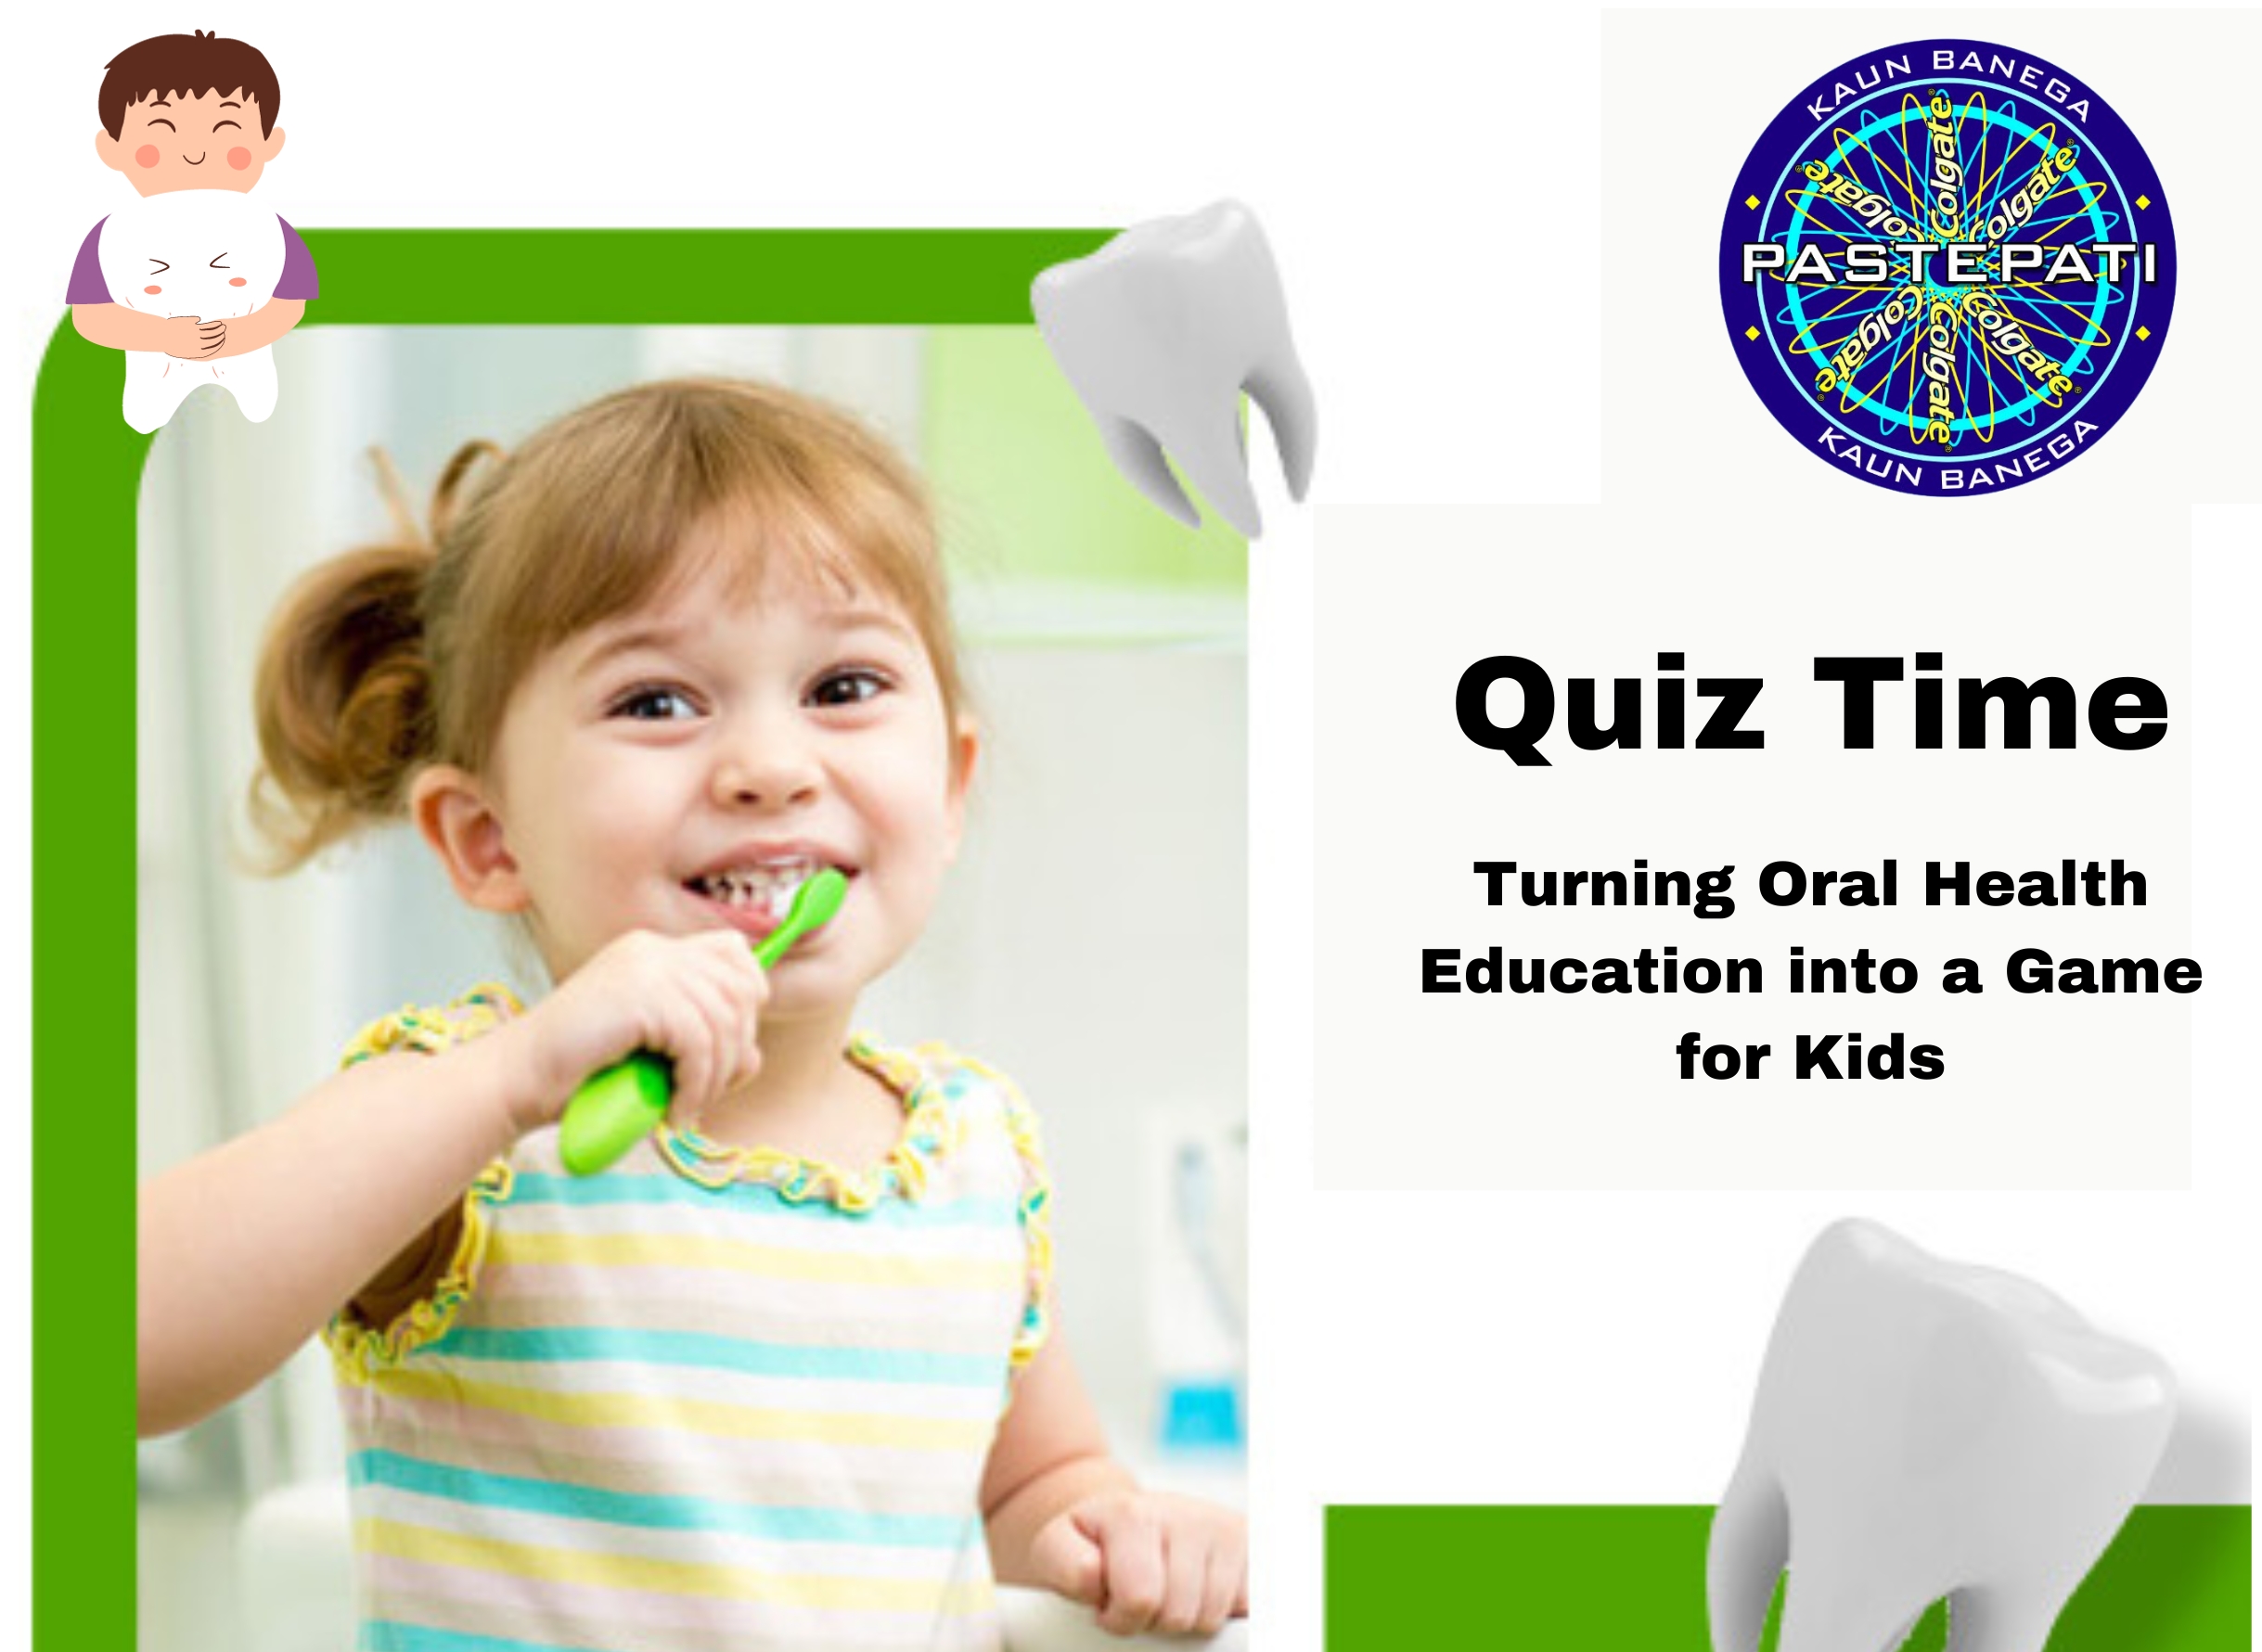 Quiz Time: Turning Oral Health Education into a Game for Kids